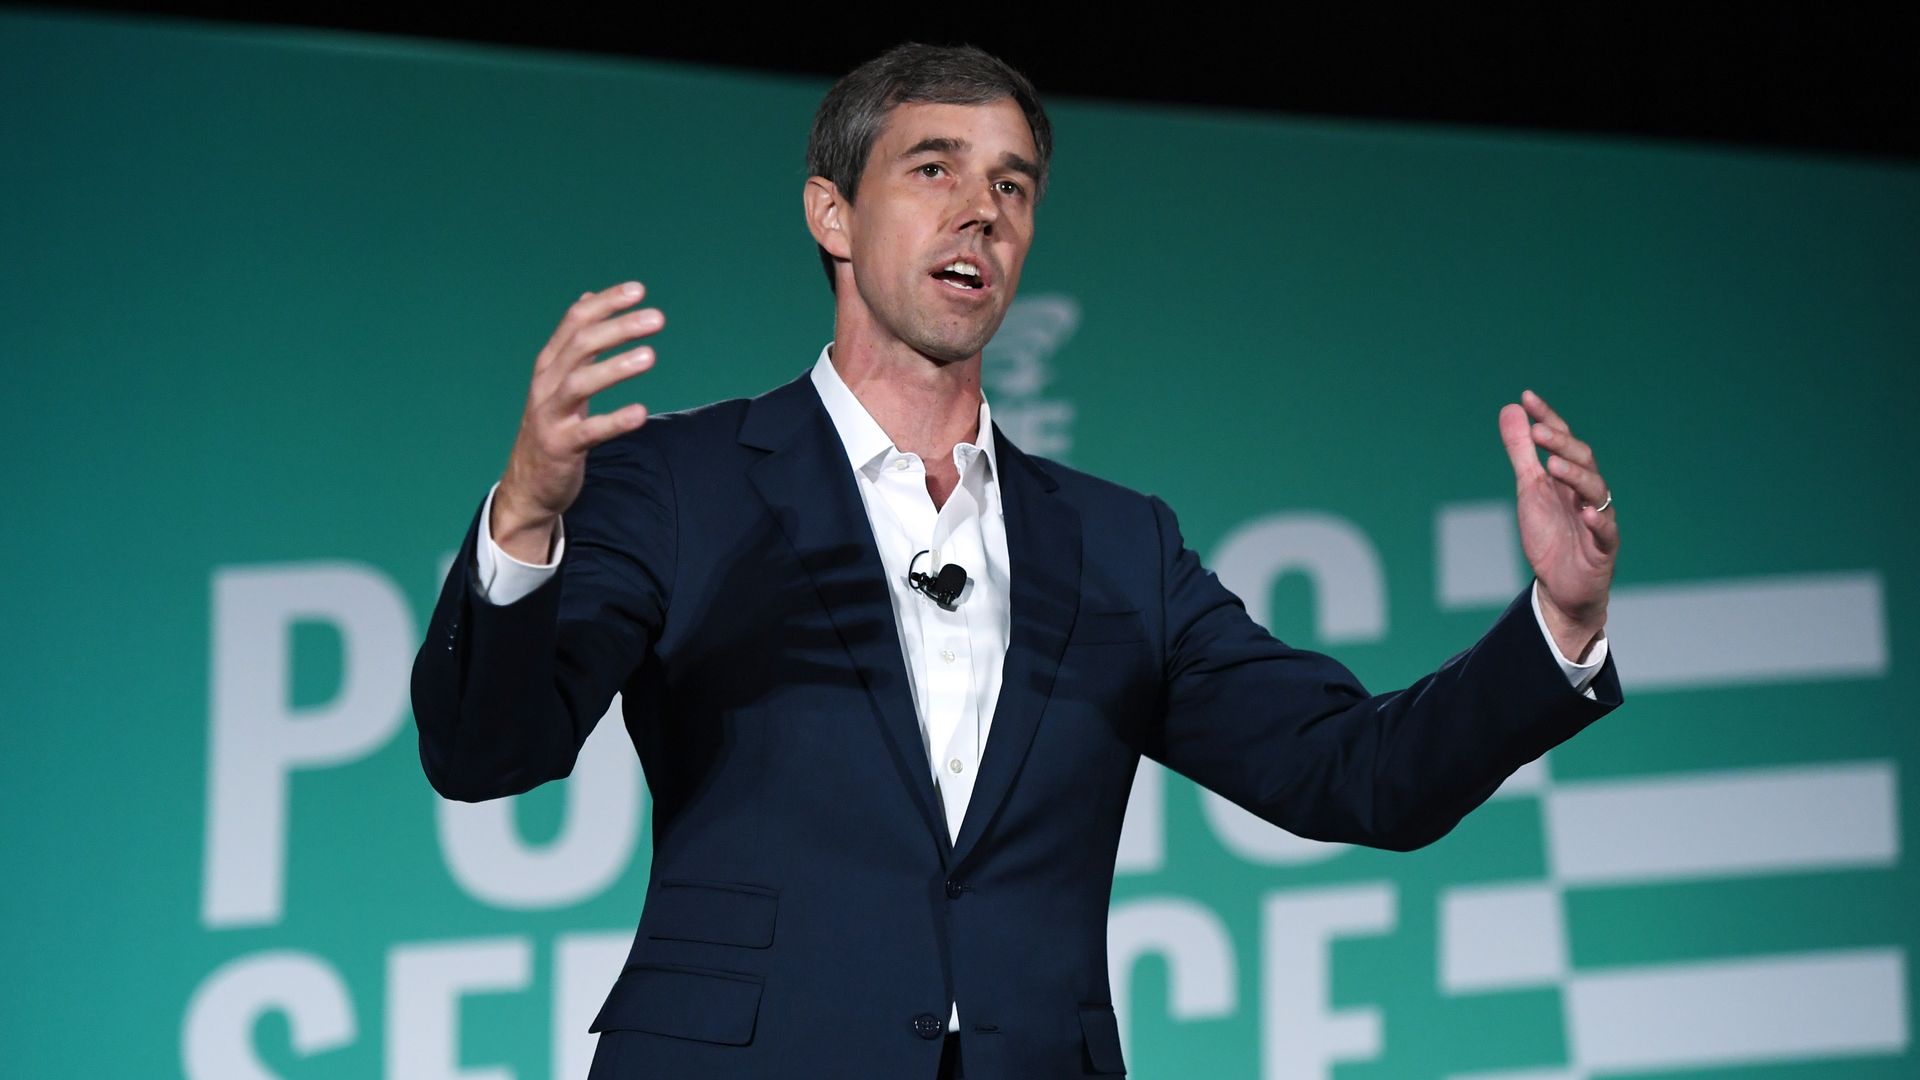 Democratic presidential candidate Beto O’Rourke speaks during the 2020 Public Service Forum at UNLV on August 3, 2019 in Las Vegas